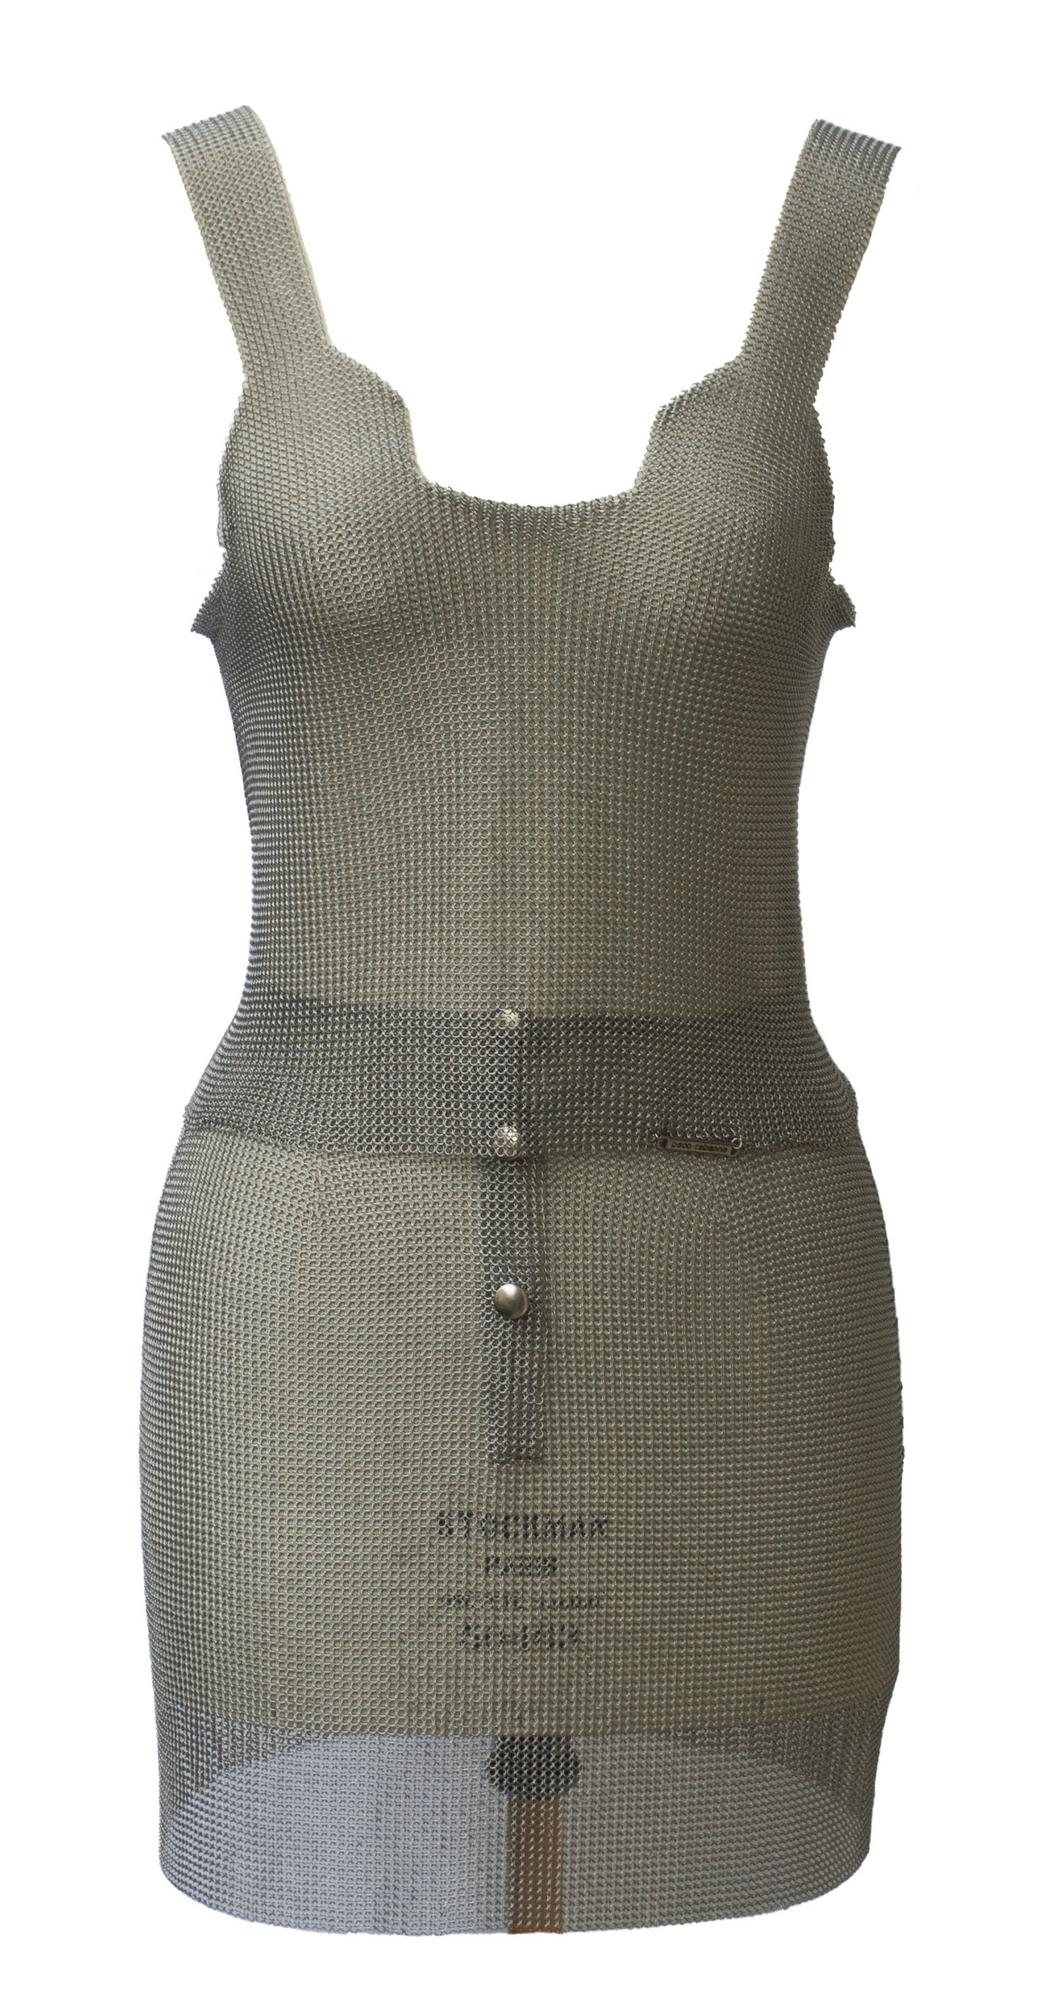 Paco Rabanne METAL SUIT Description: Steel metal chainmaille for this suit...